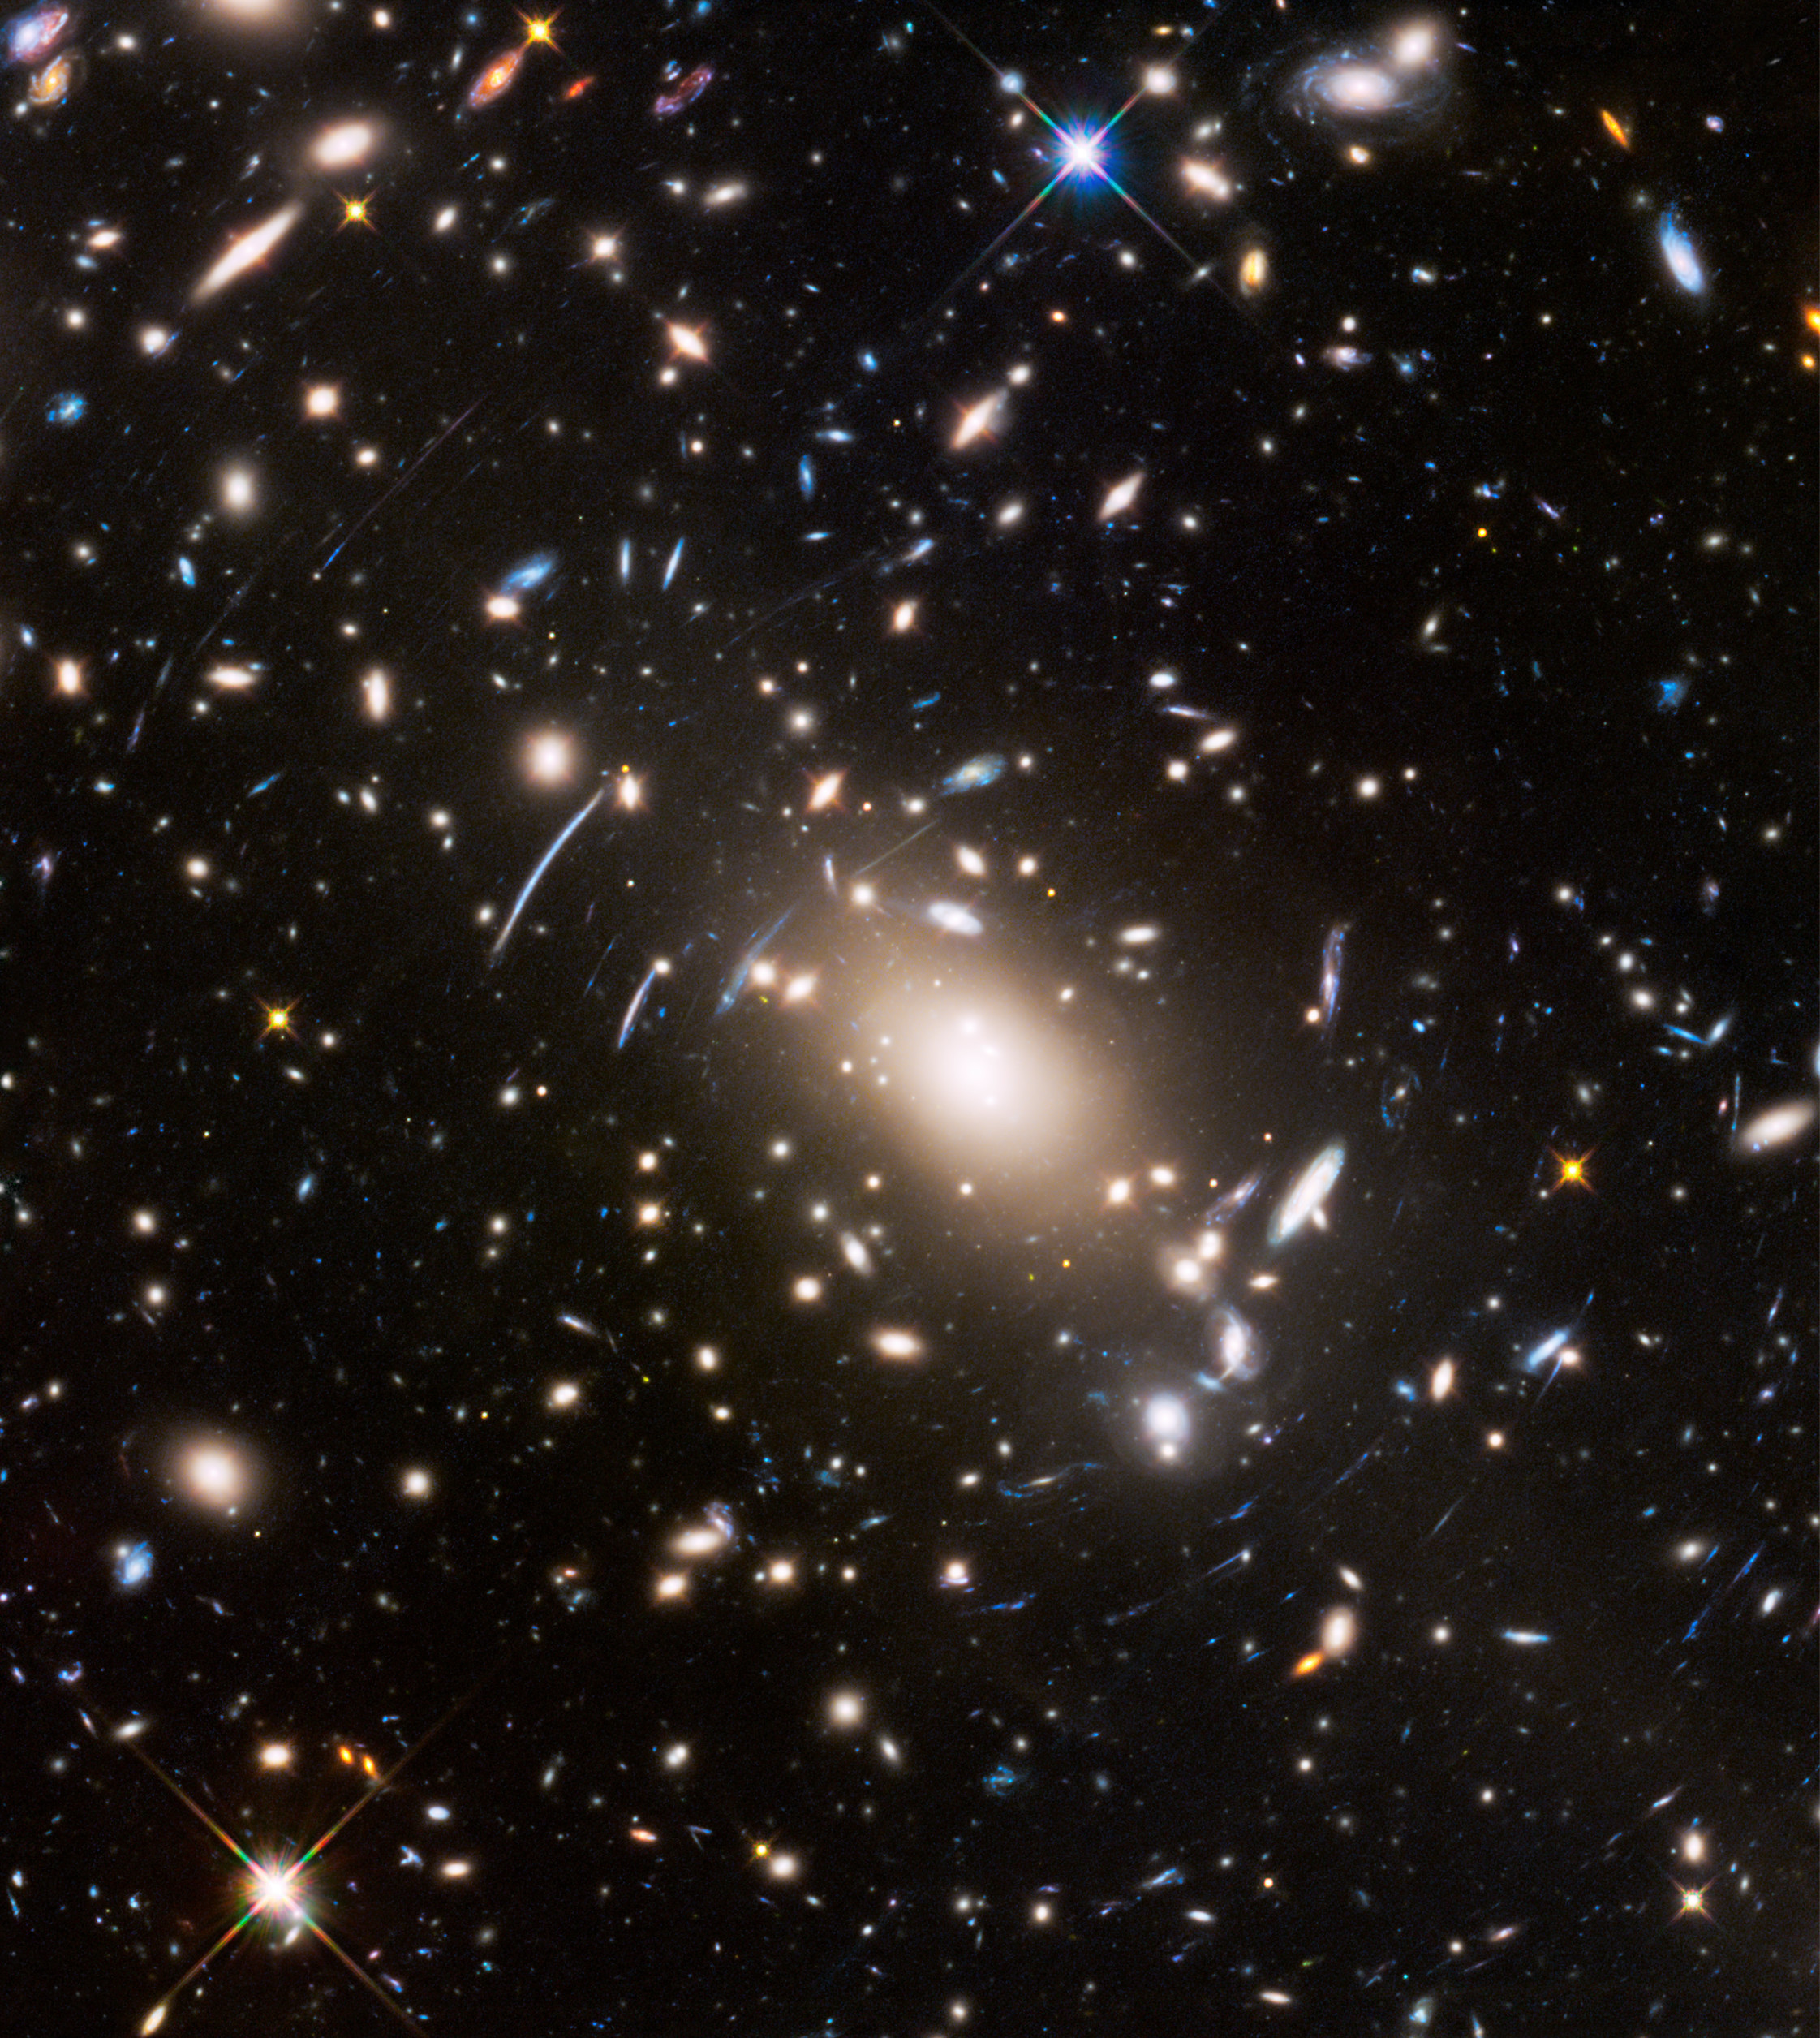 Move Over, 'Star Trek' — Hubble Telescope Sees the Real Final Frontier